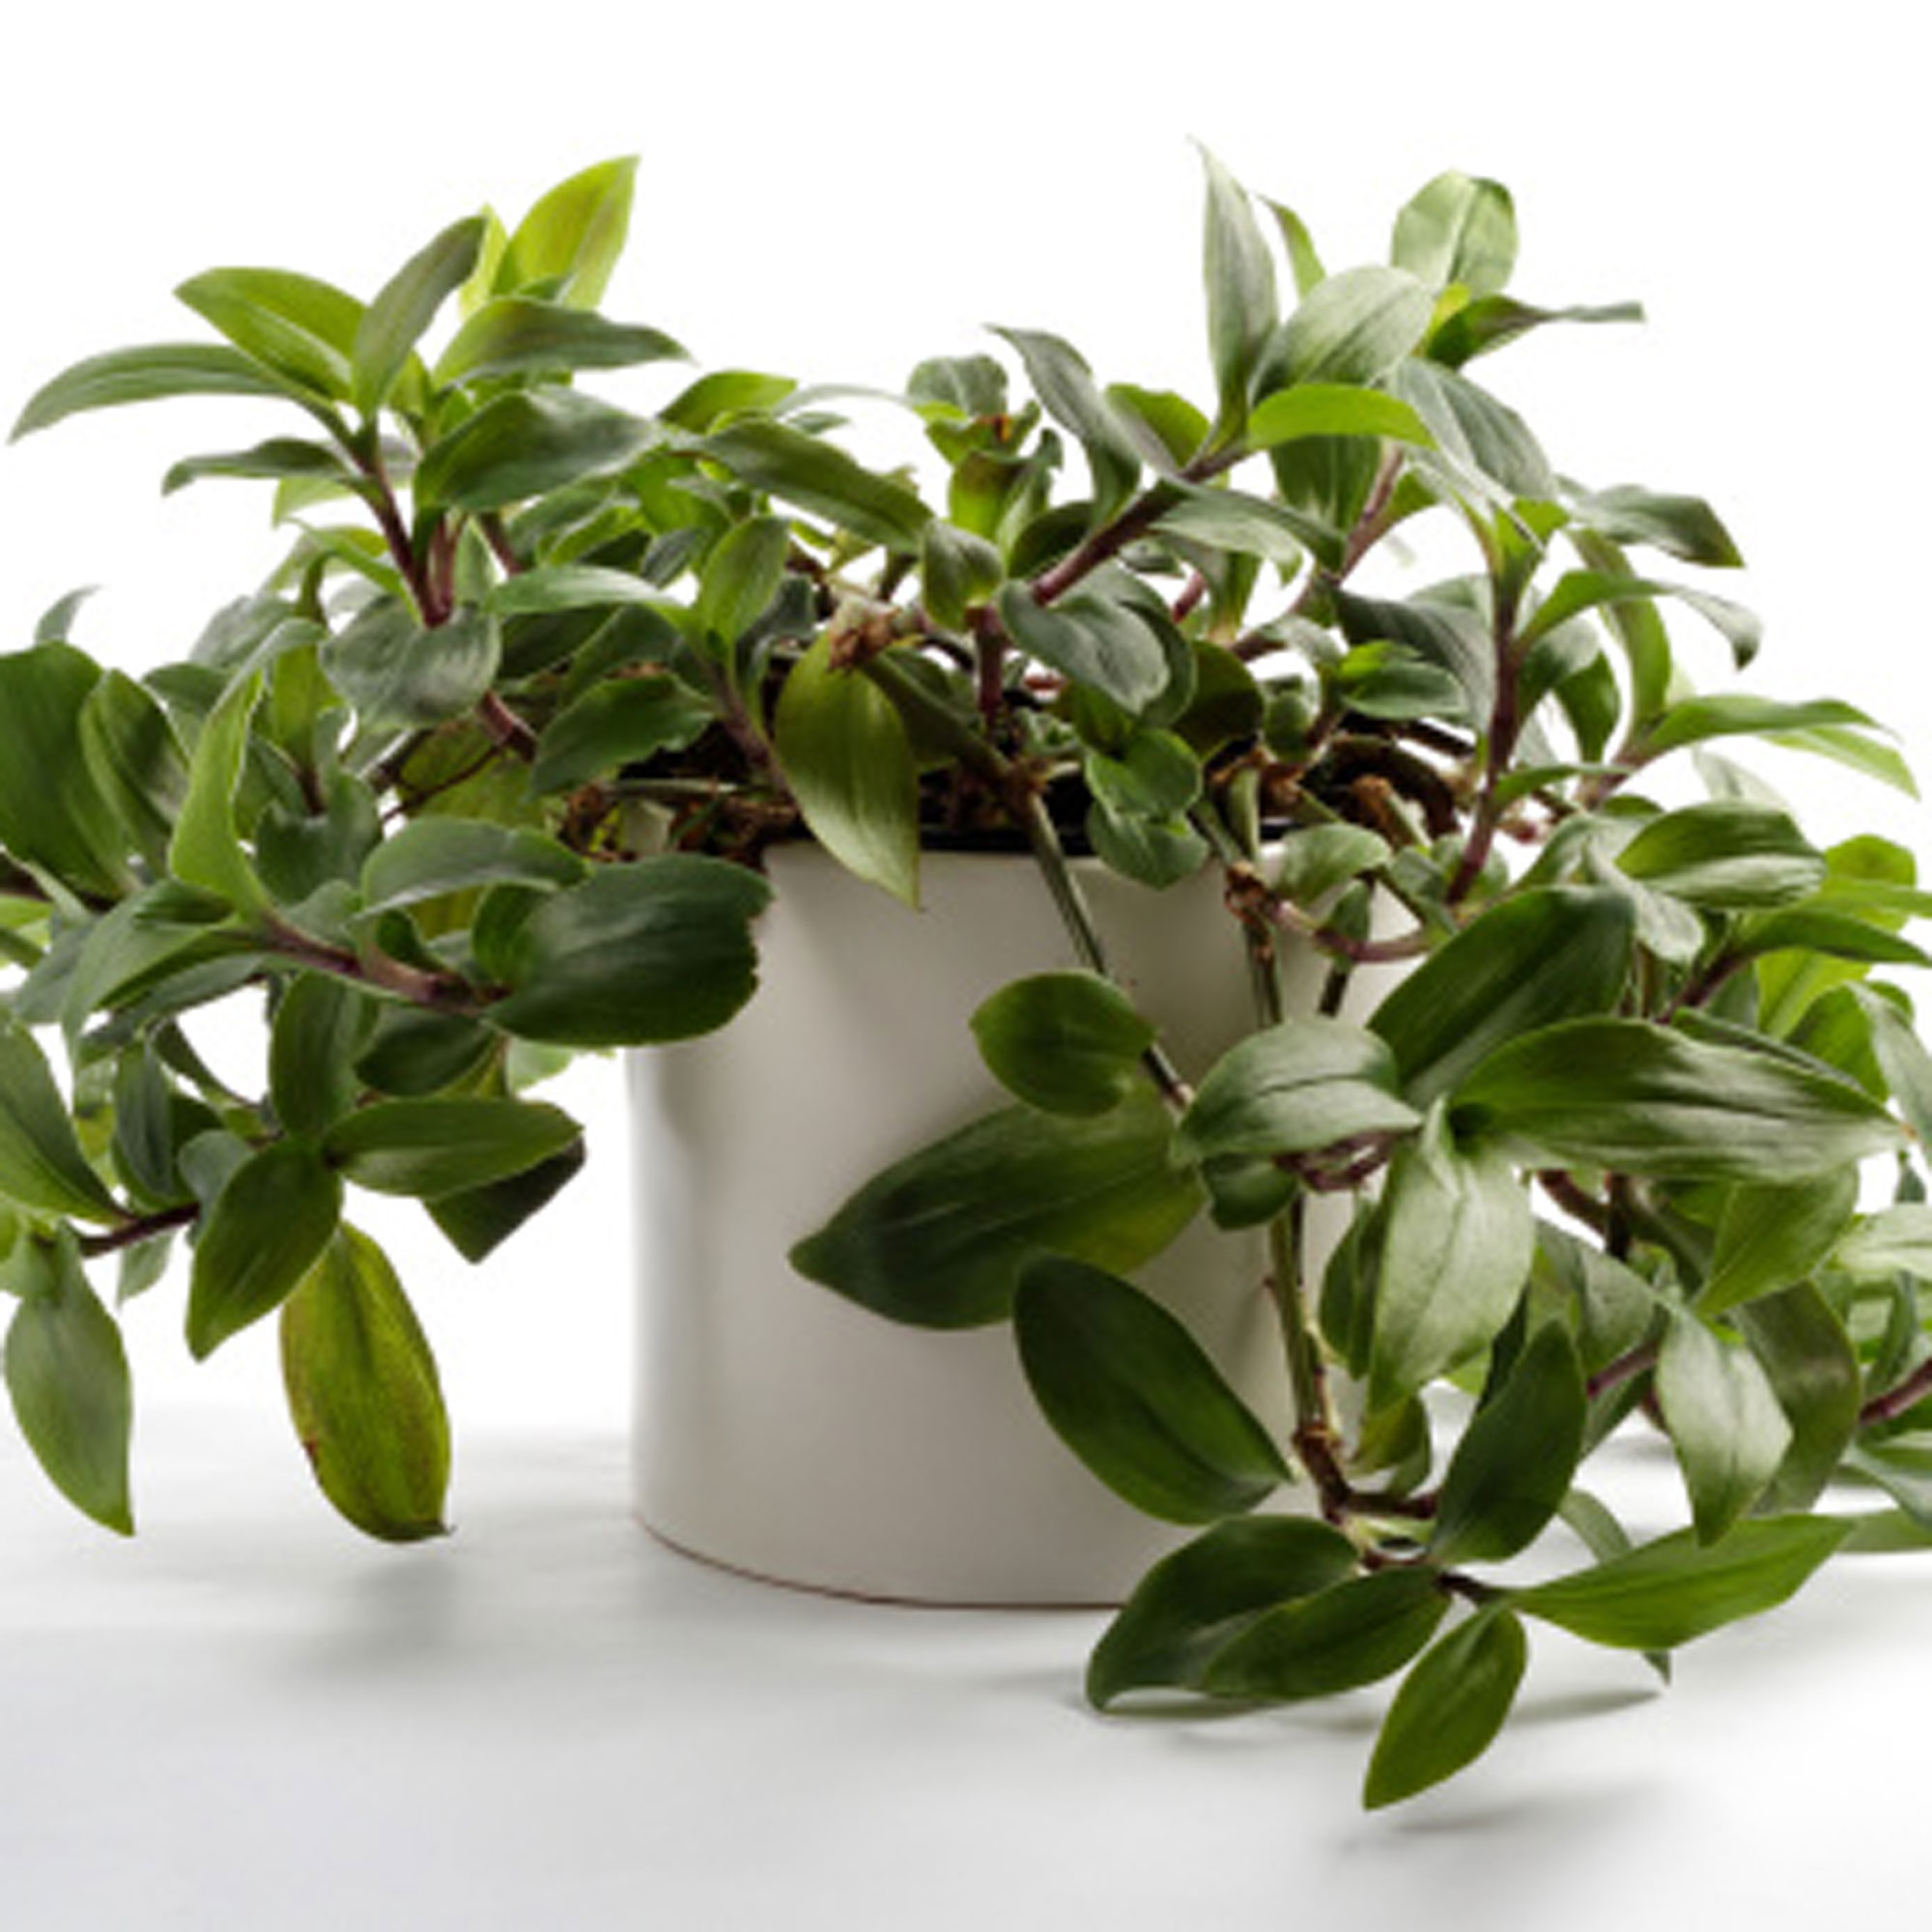 Unkillable Houseplants That Even Black Thumbs Can Keep 